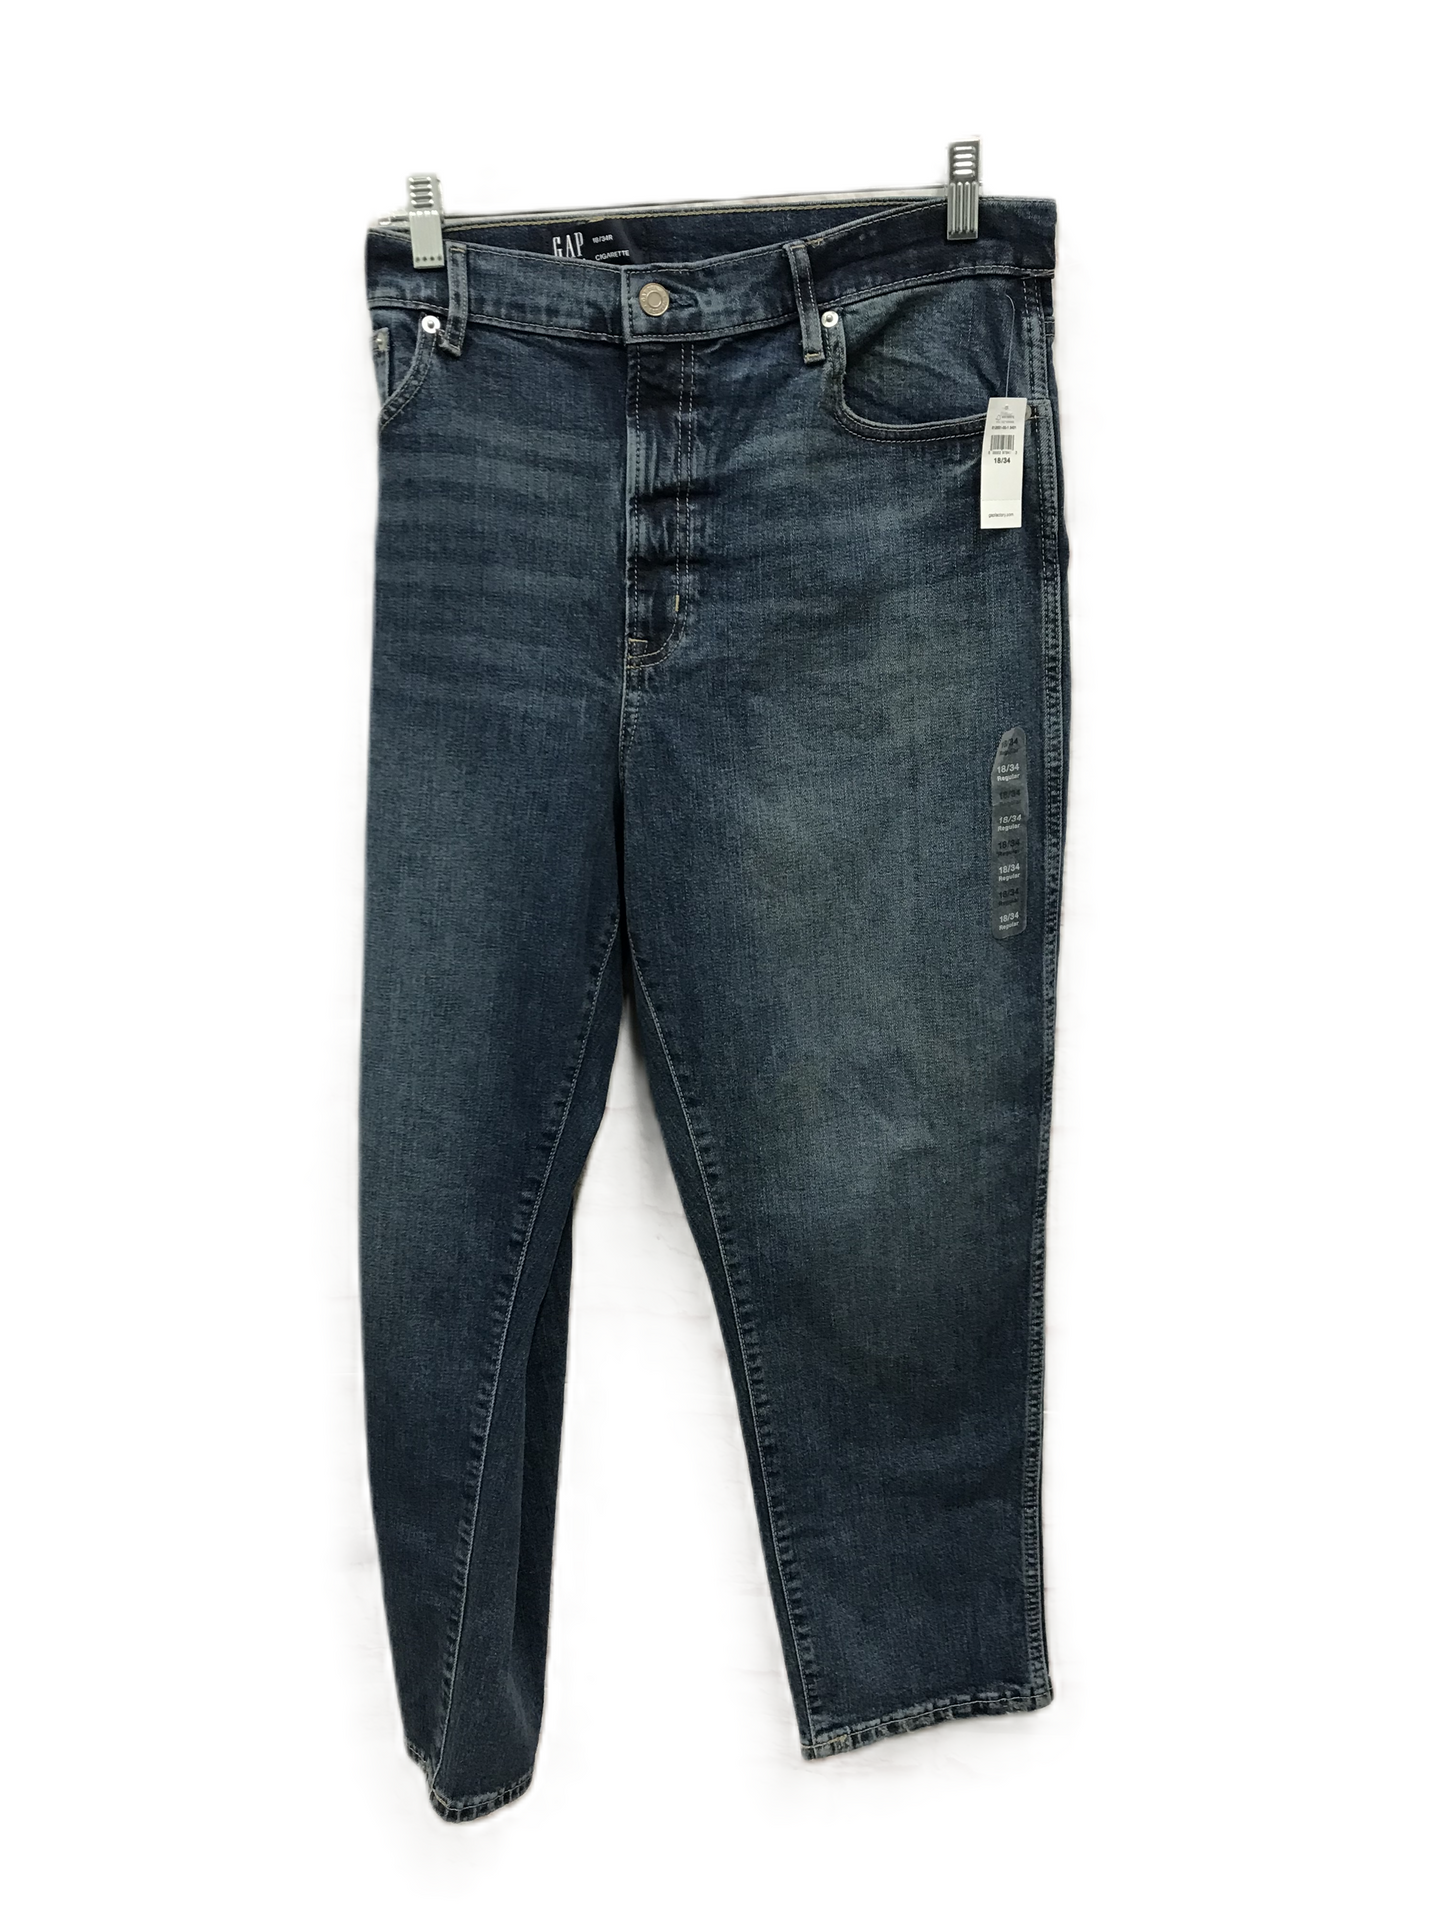 Blue Jeans Straight By Gap, Size: 18